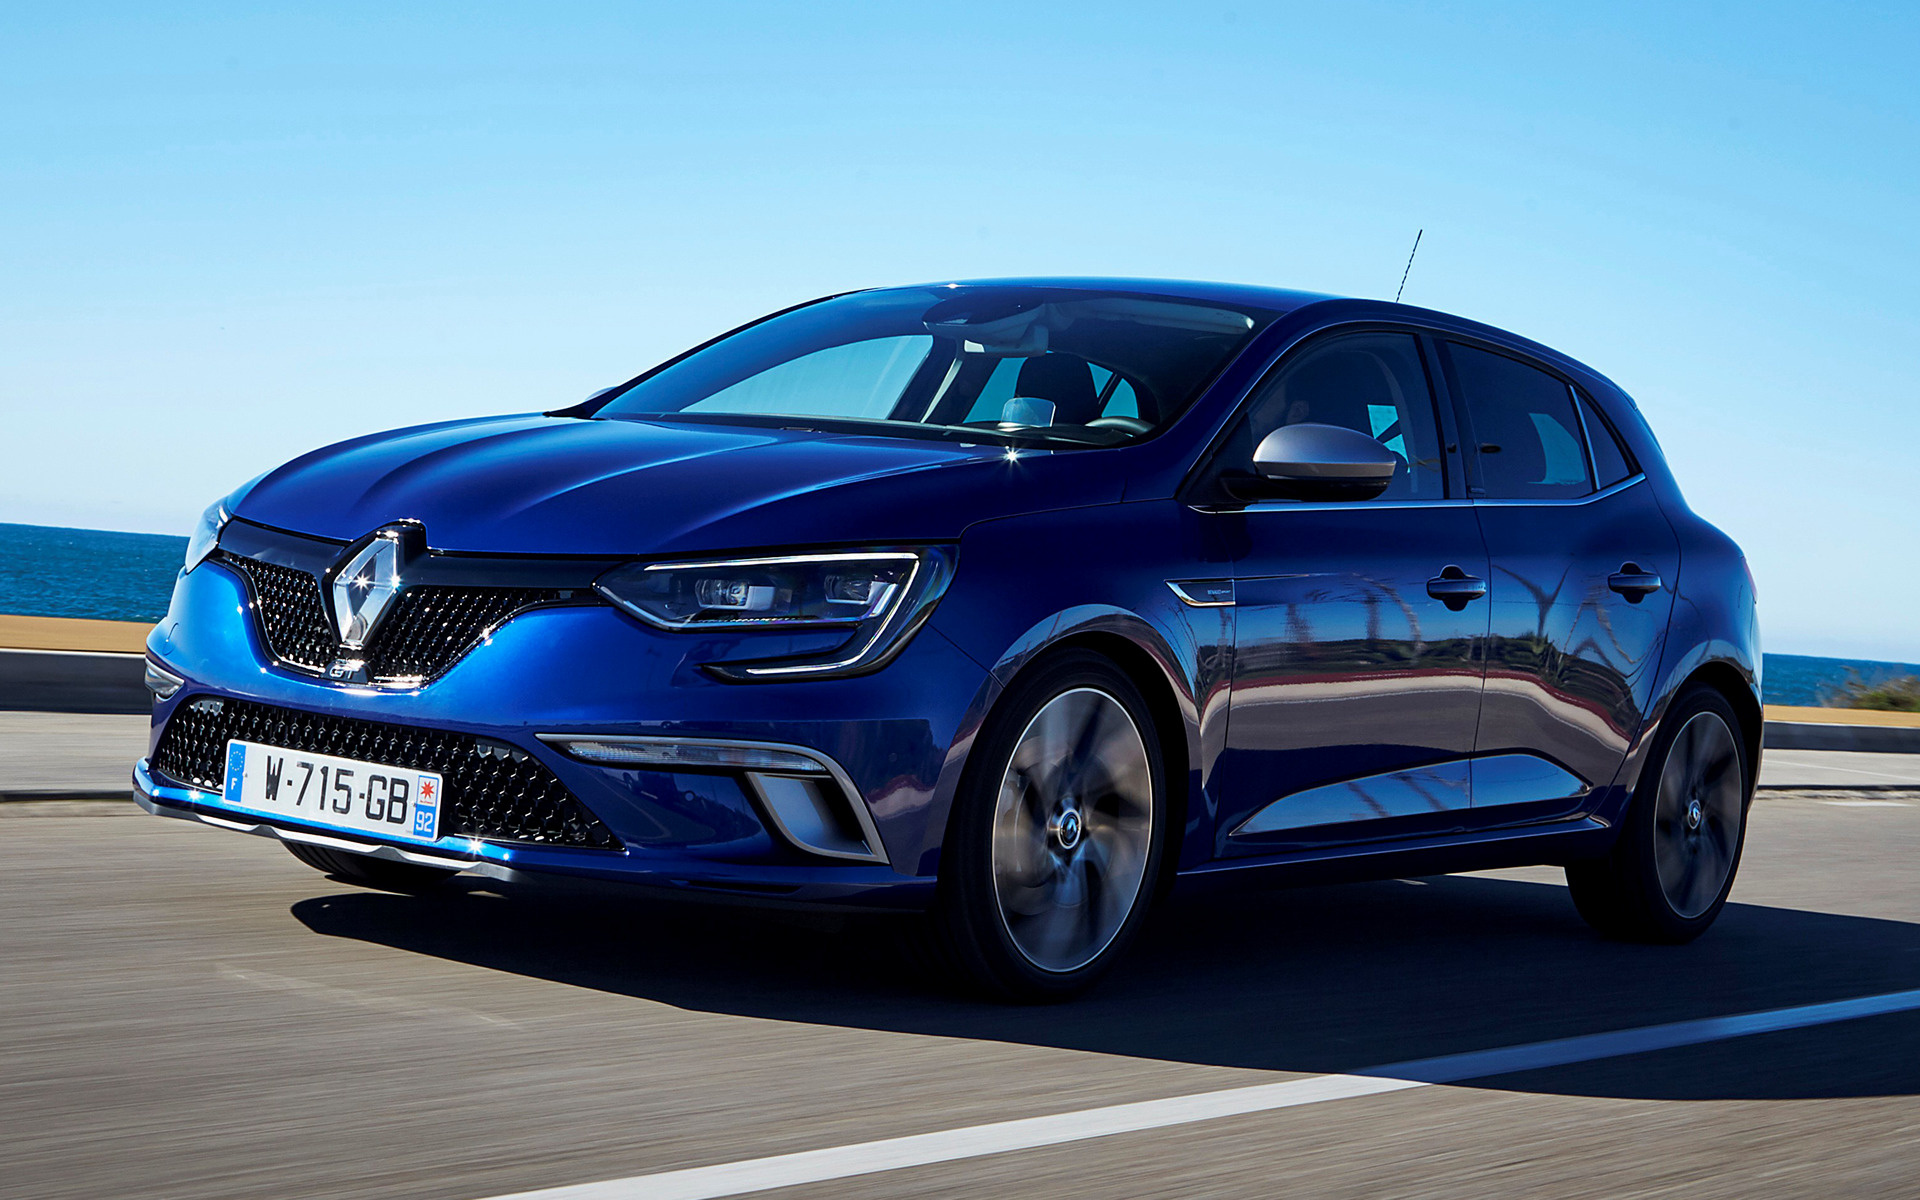 Free Download Renault Megane Gt 15 Wallpapers And Hd Images Car Pixel 19x10 For Your Desktop Mobile Tablet Explore 98 Renault Megane Wallpapers Renault Megane Wallpapers Renault Captur Wallpapers Renault Logo Wallpapers